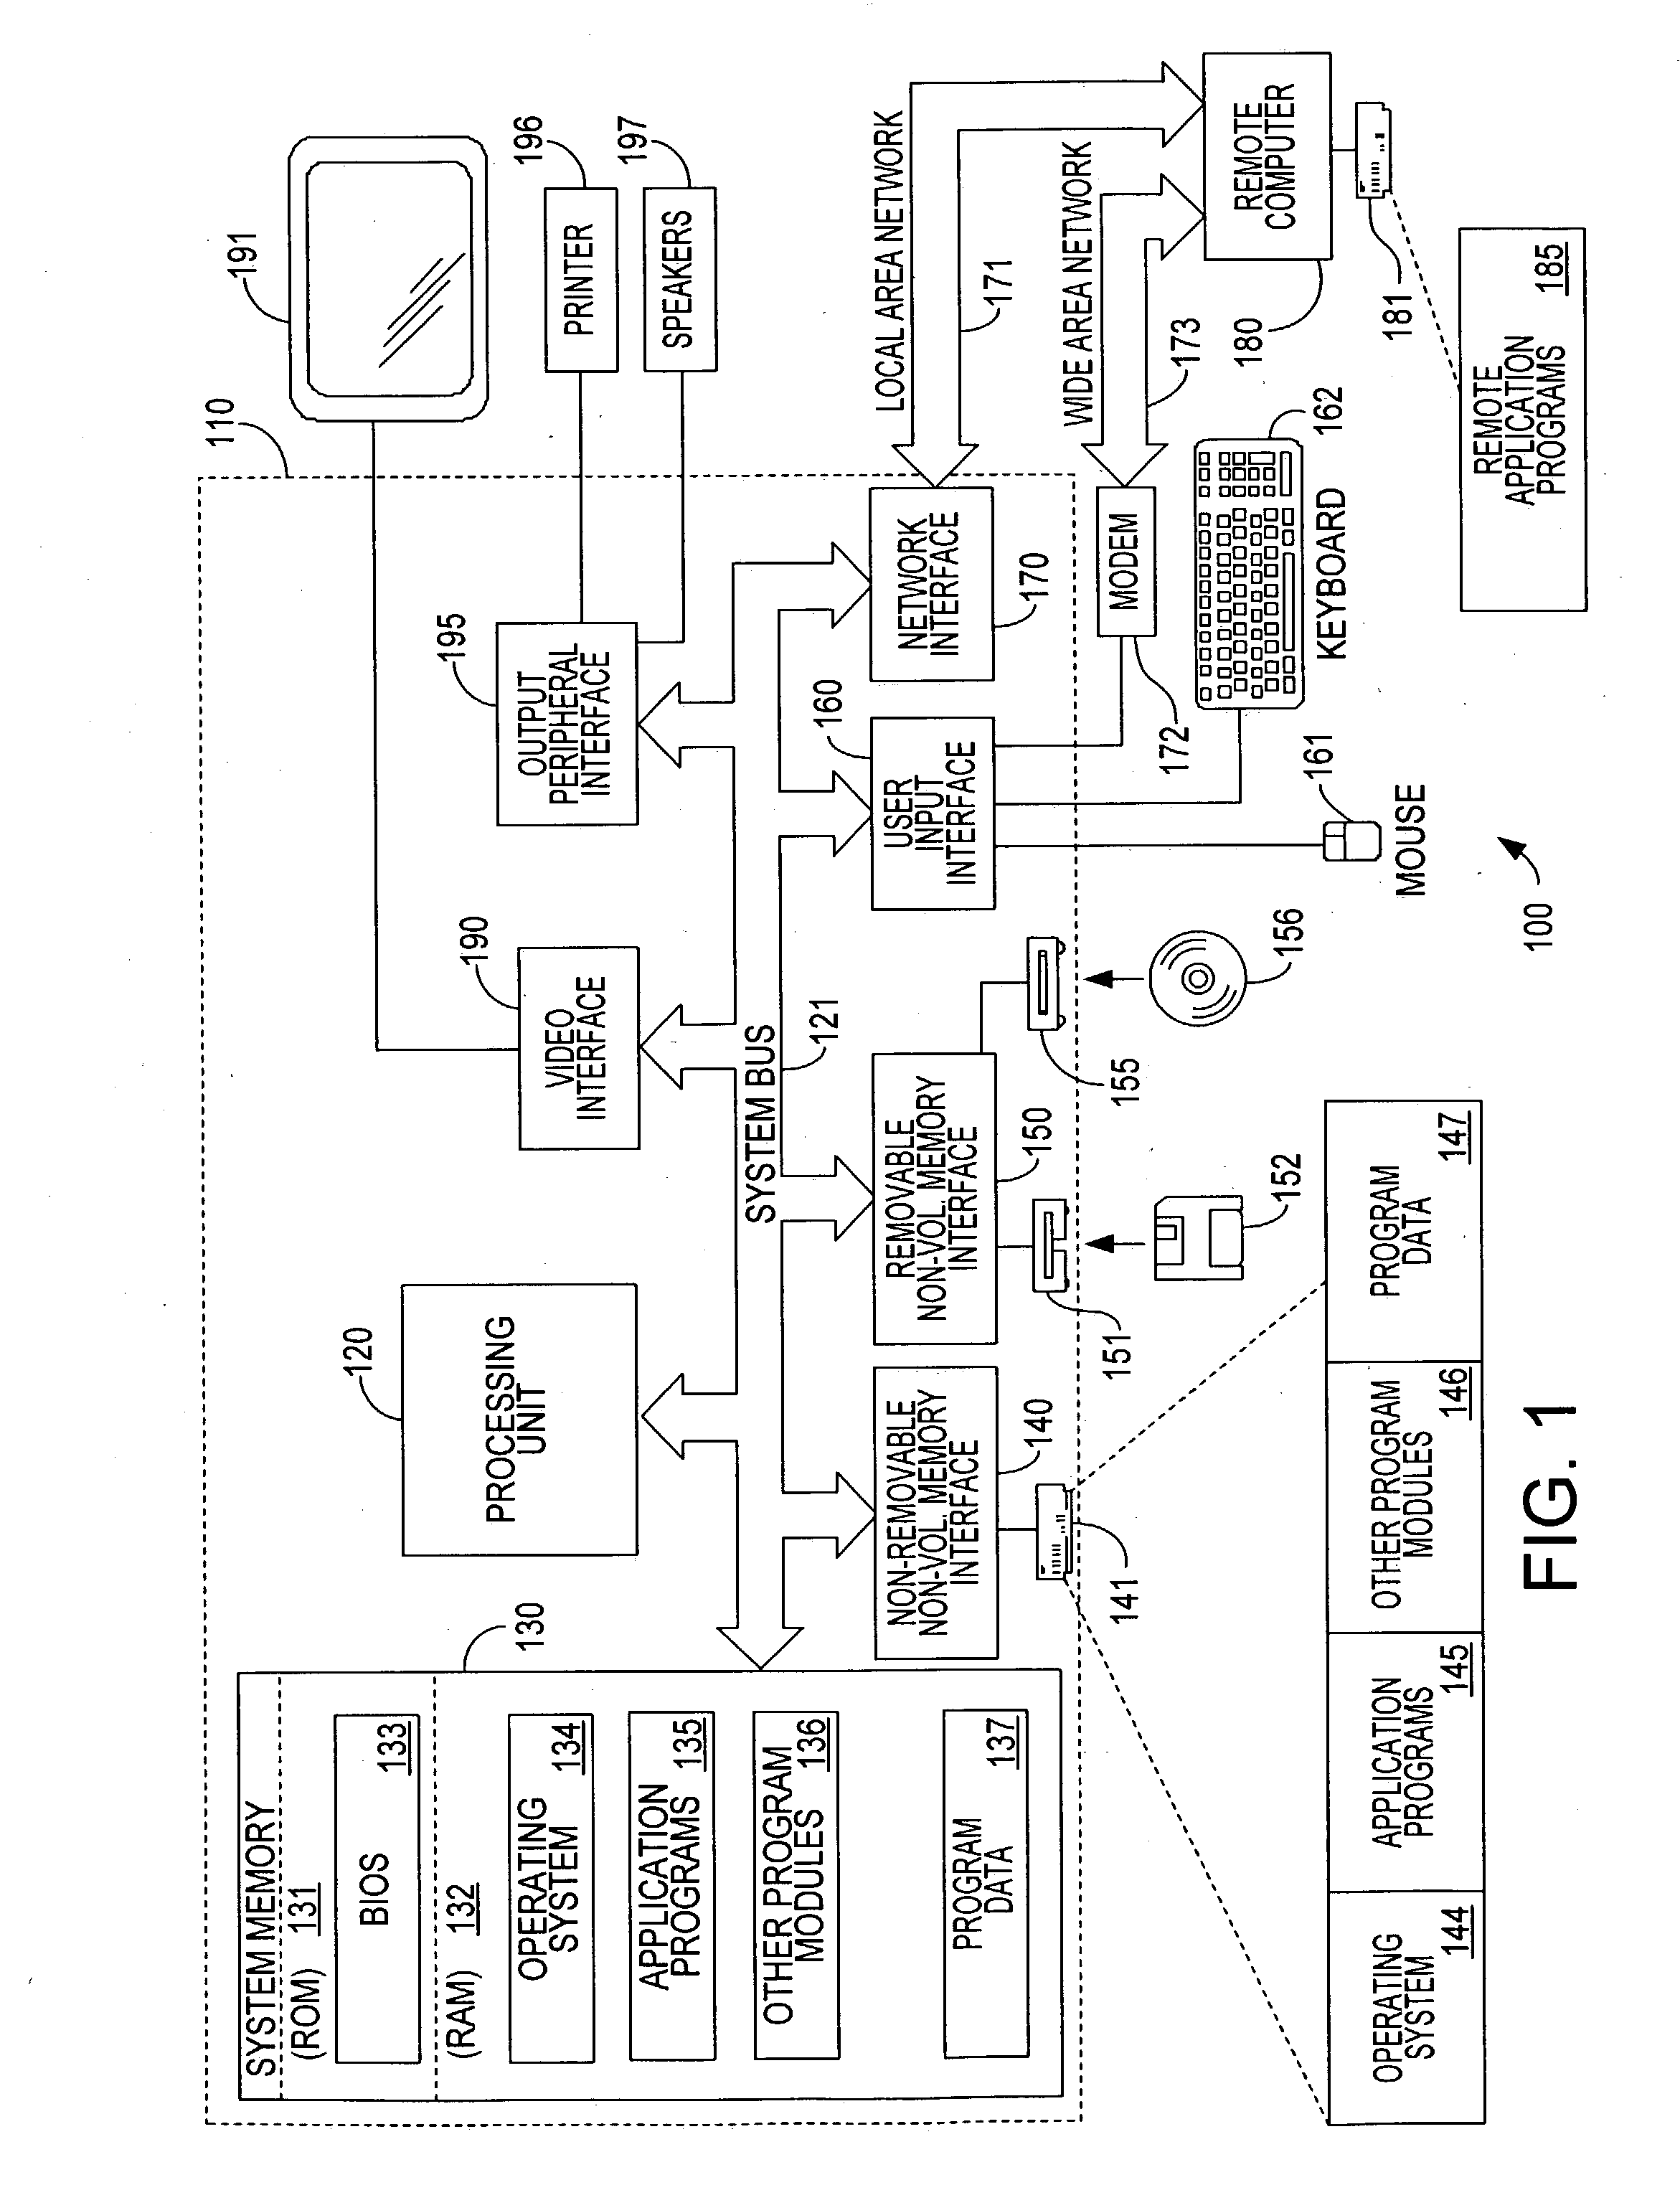 Peer-to-peer name resolution wire protocol and message format data structure for use therein